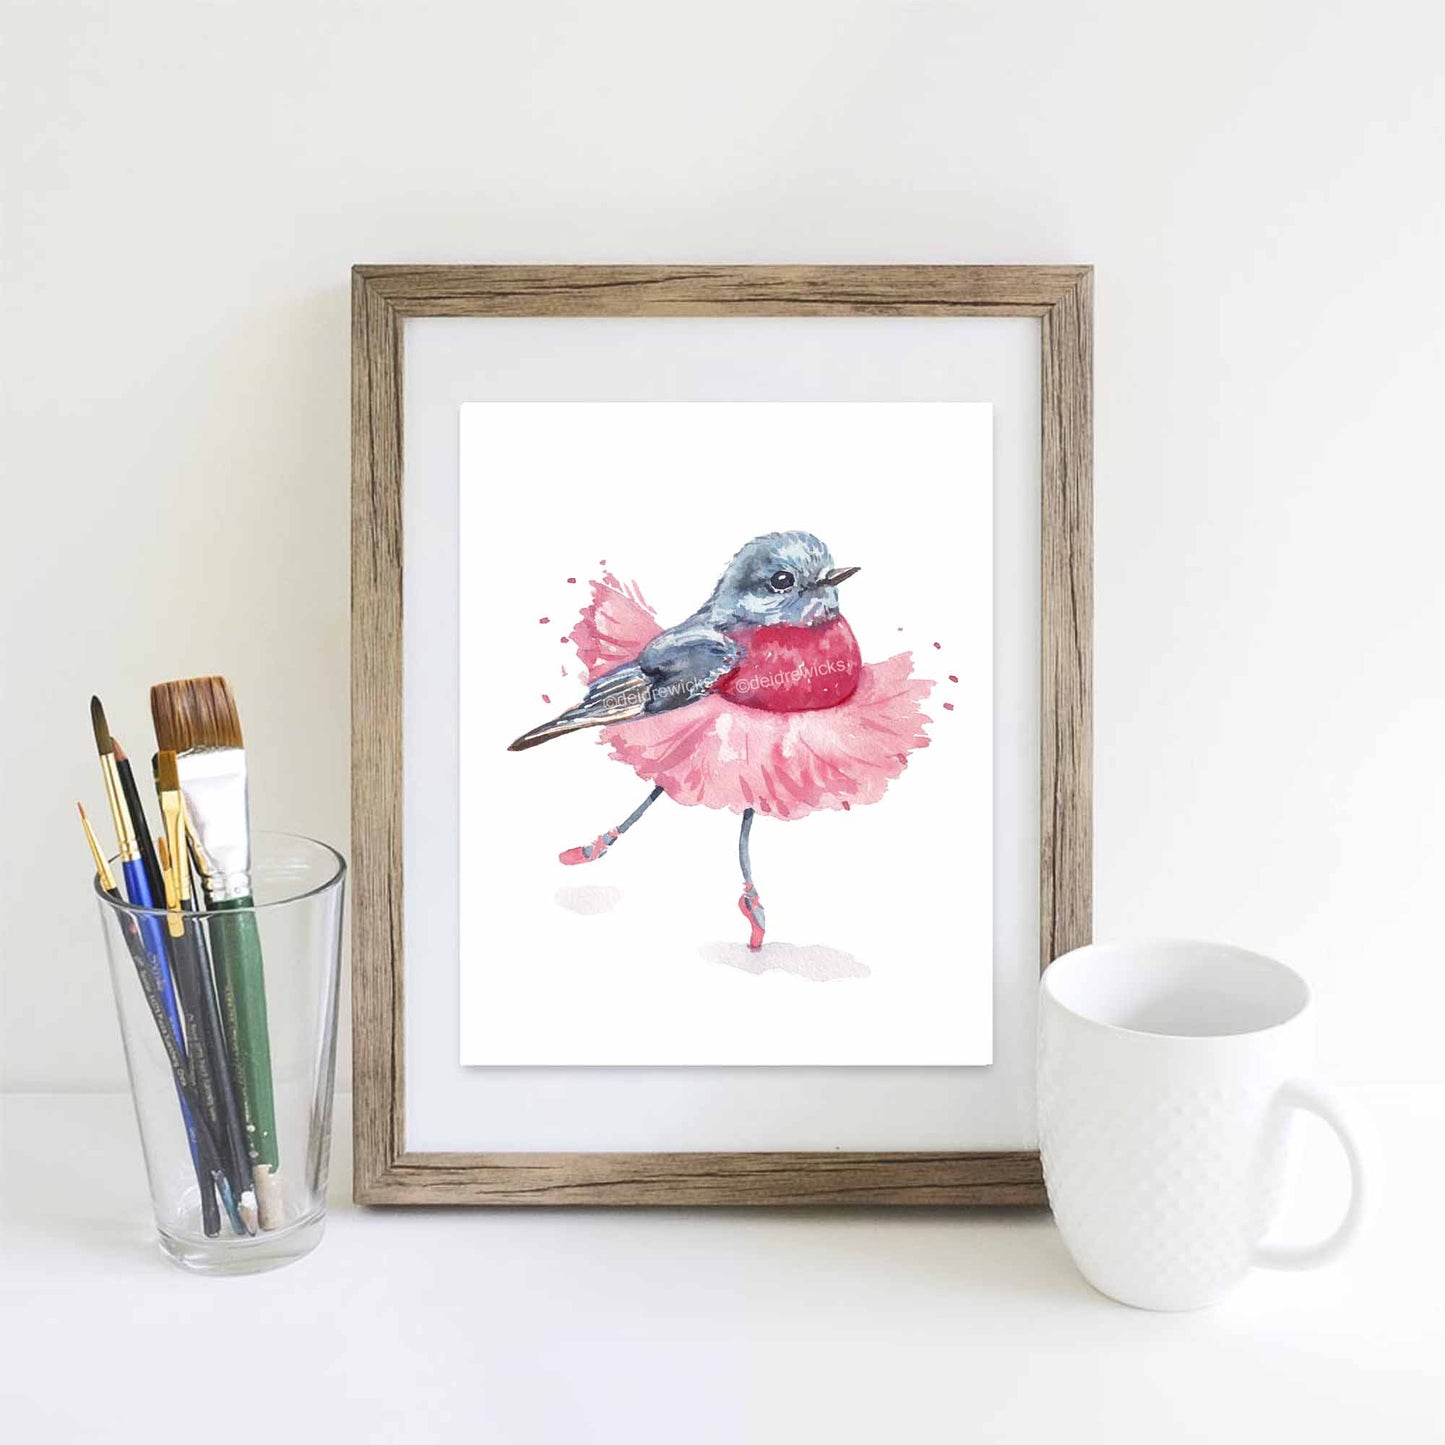 Framed example of a ballet birdie watercolour painting by Deidre WIcks